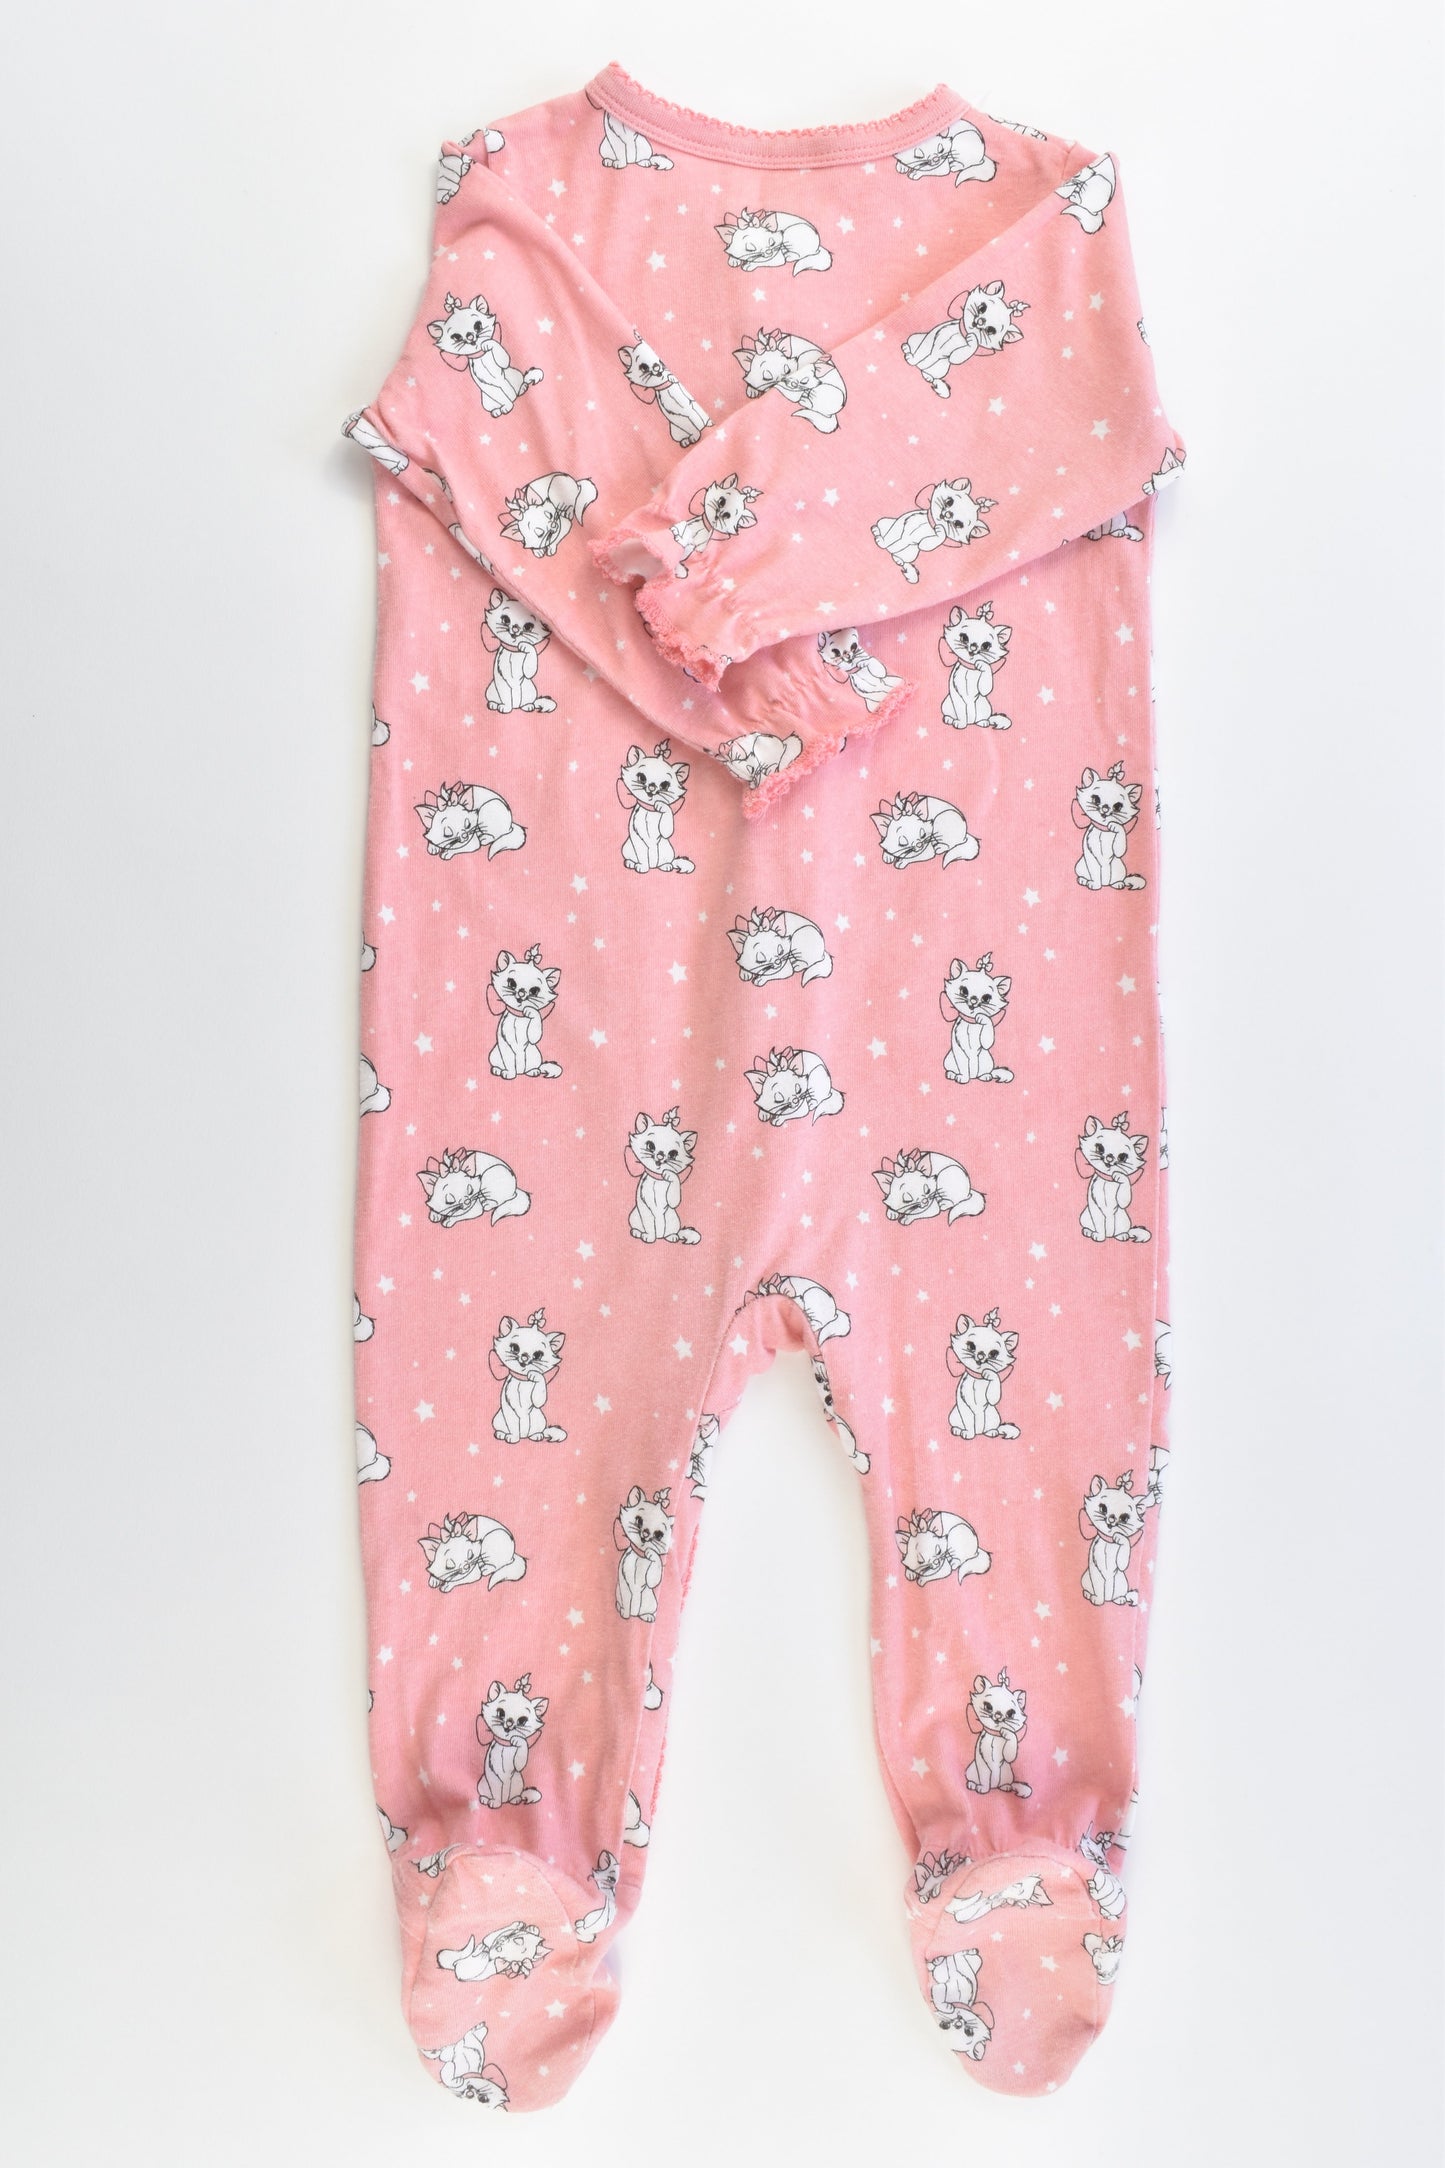 H&M Size 0 (74 cm, 6-9 months) Marie Aristocats Footed Romper